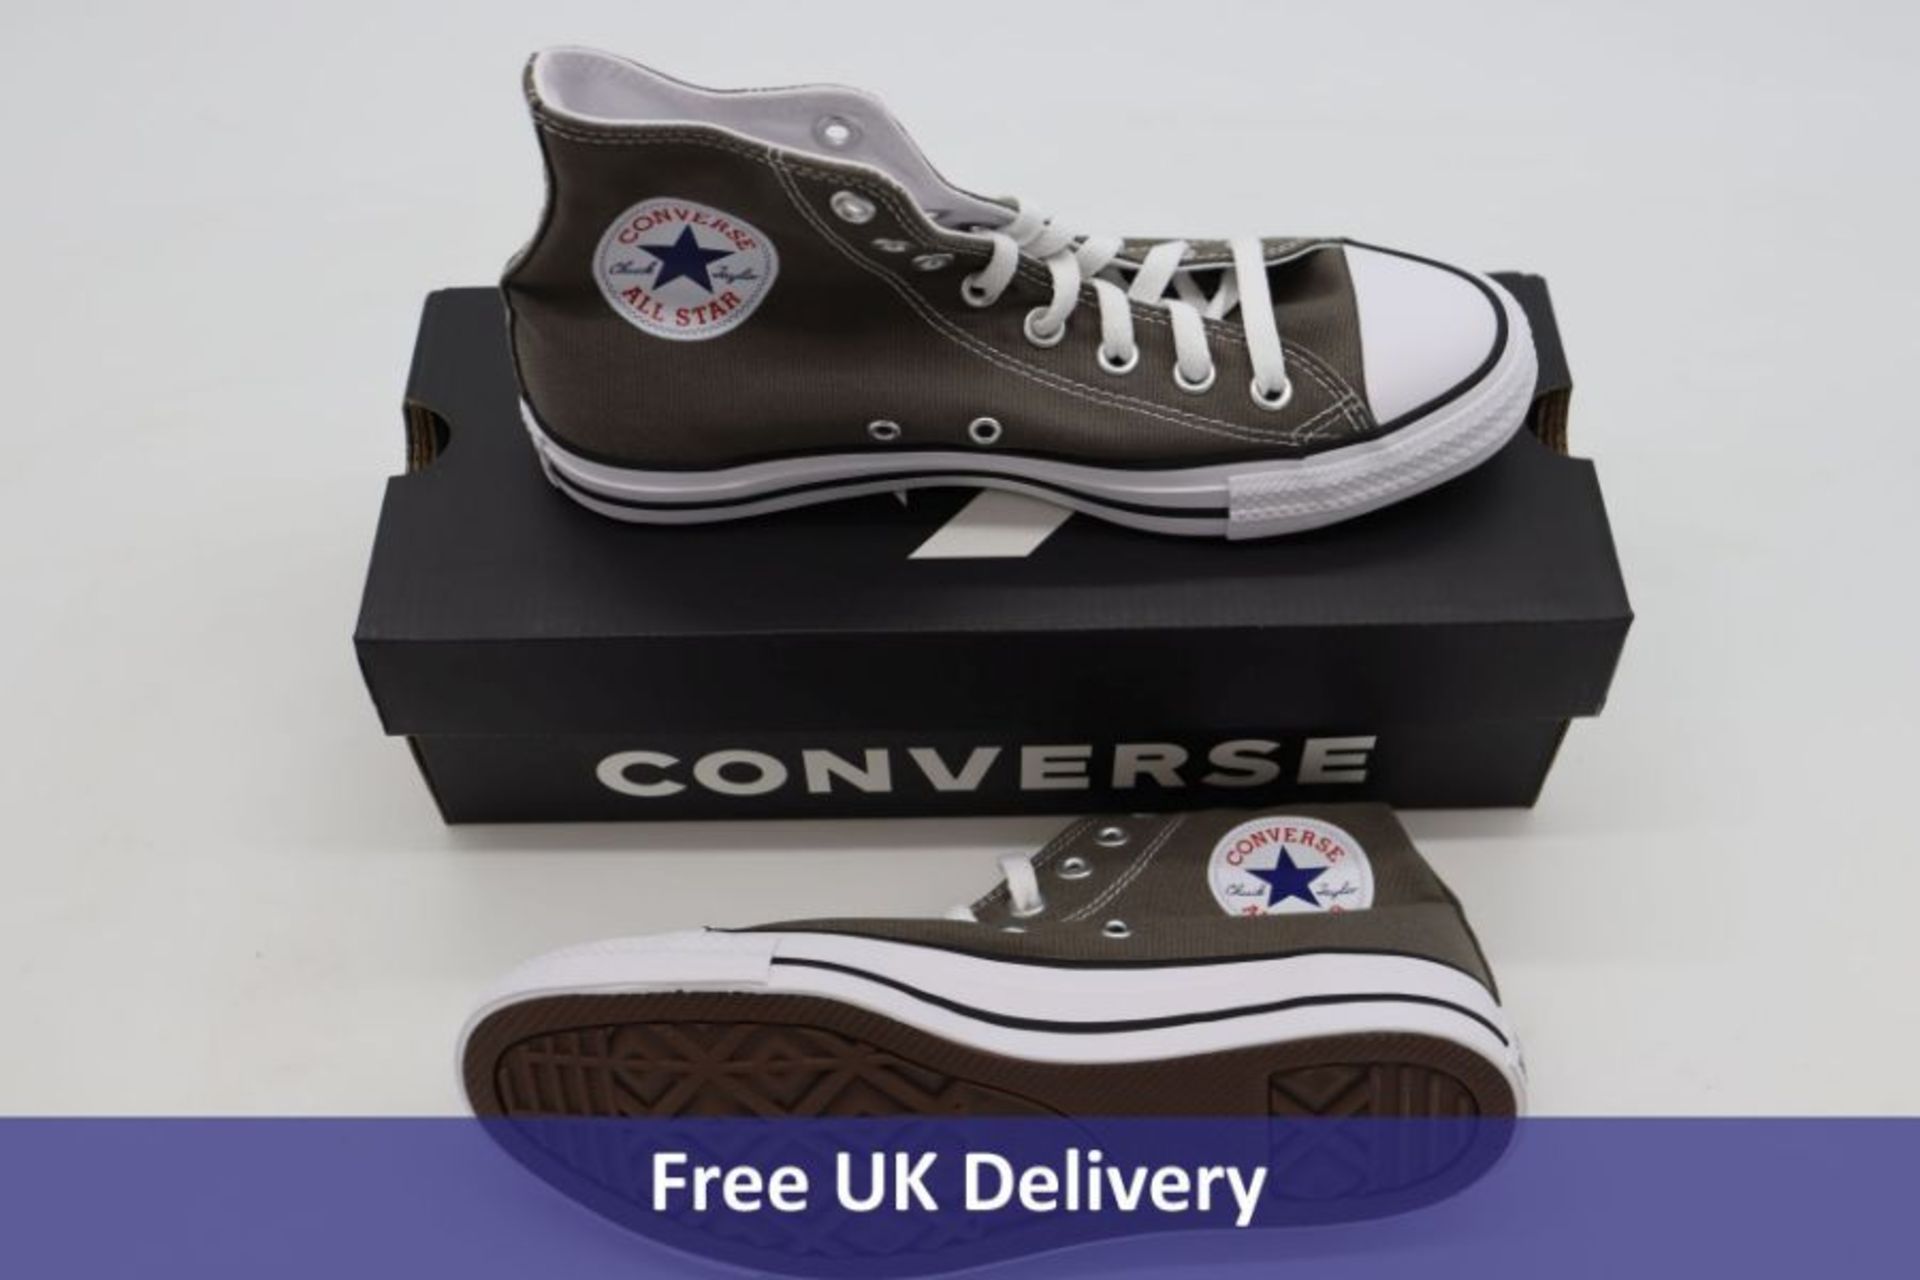 Converse Chuck Taylor All Star Seasonal Colour Canvas High Top Trainers, Charcoal, UK 7